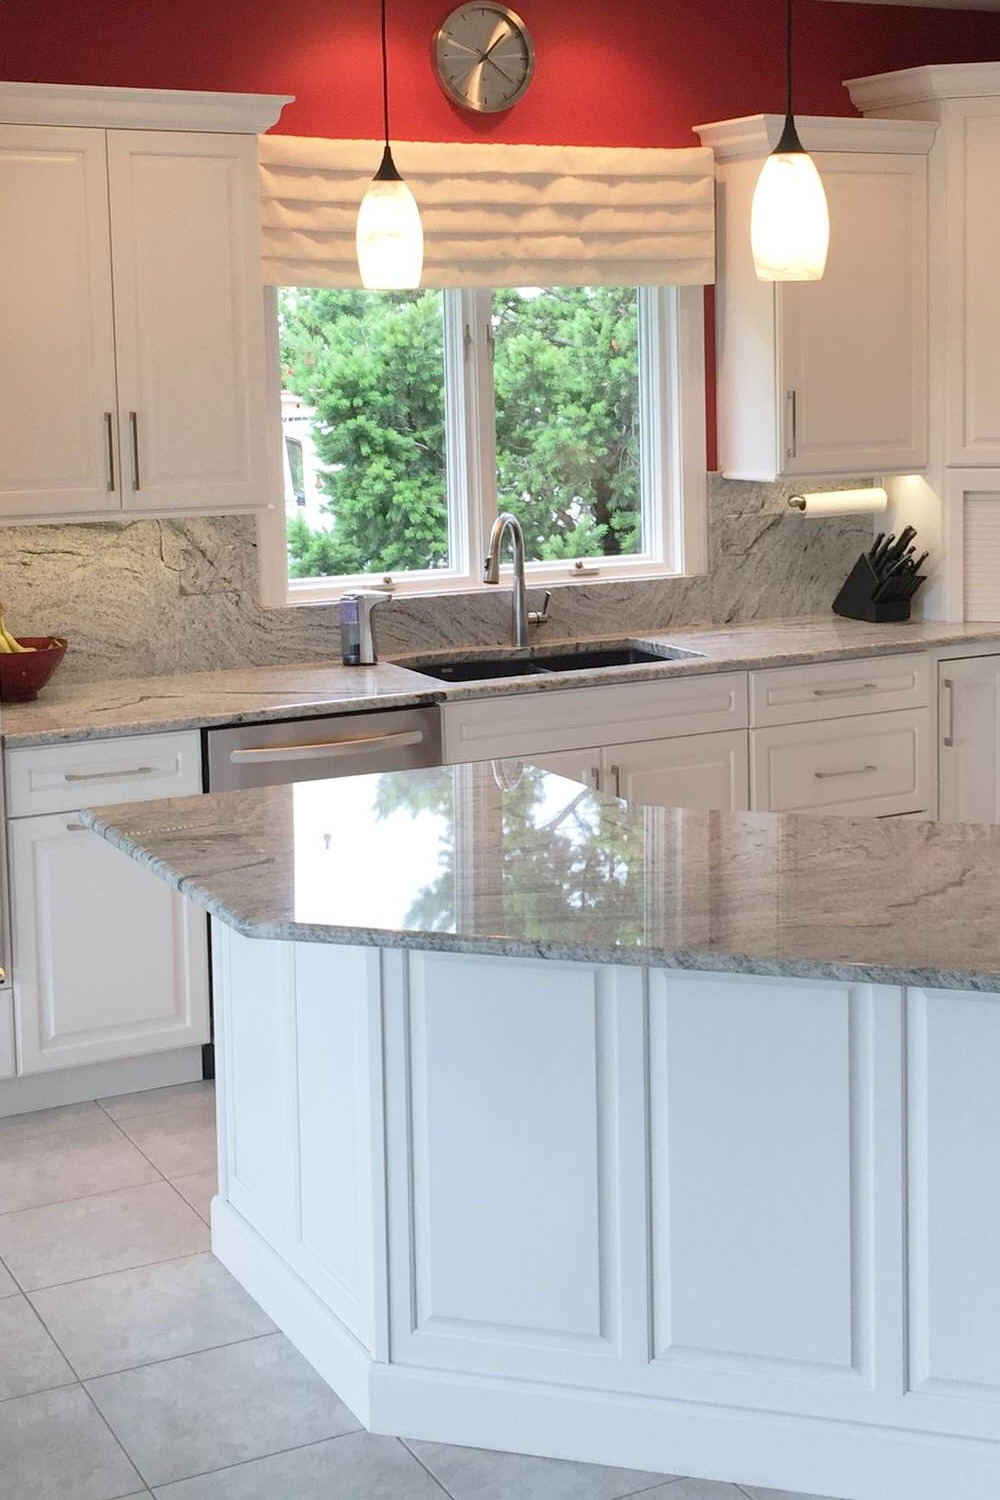 Height Look Natural Website Wall Viscount White Counters White Cabinetry